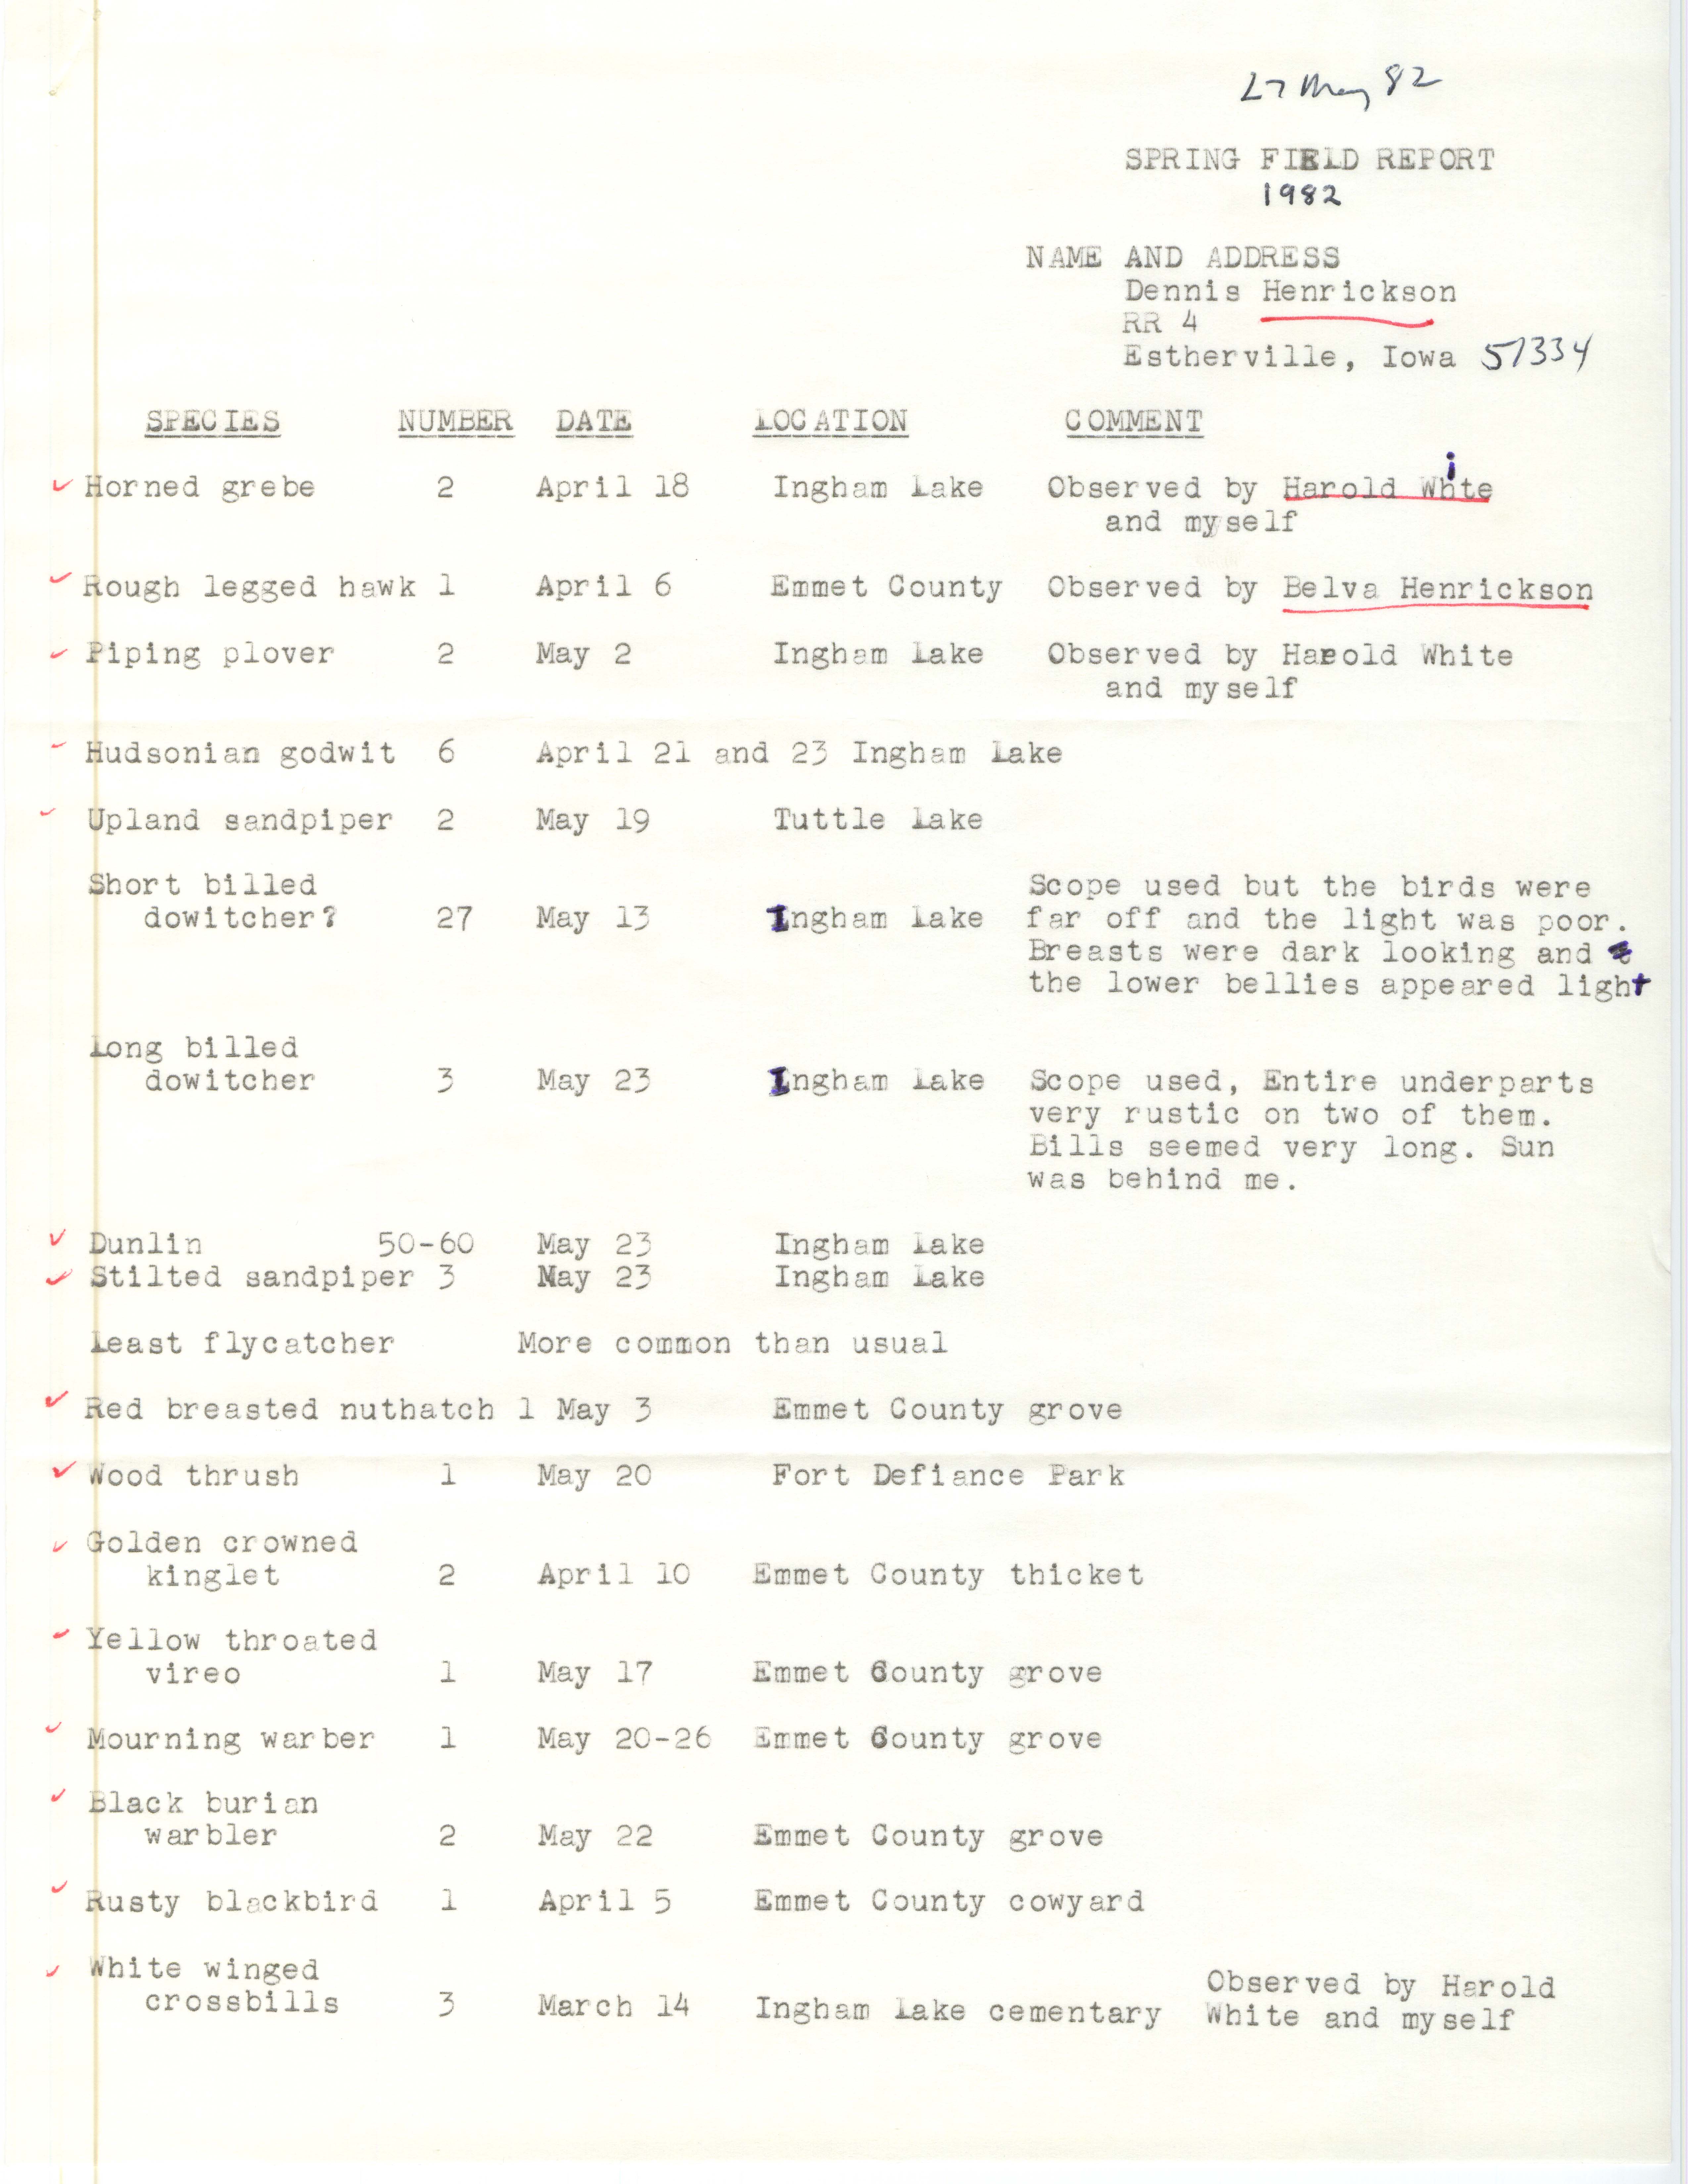 Field notes contributed by Dennis Henrickson, May 27, 1982